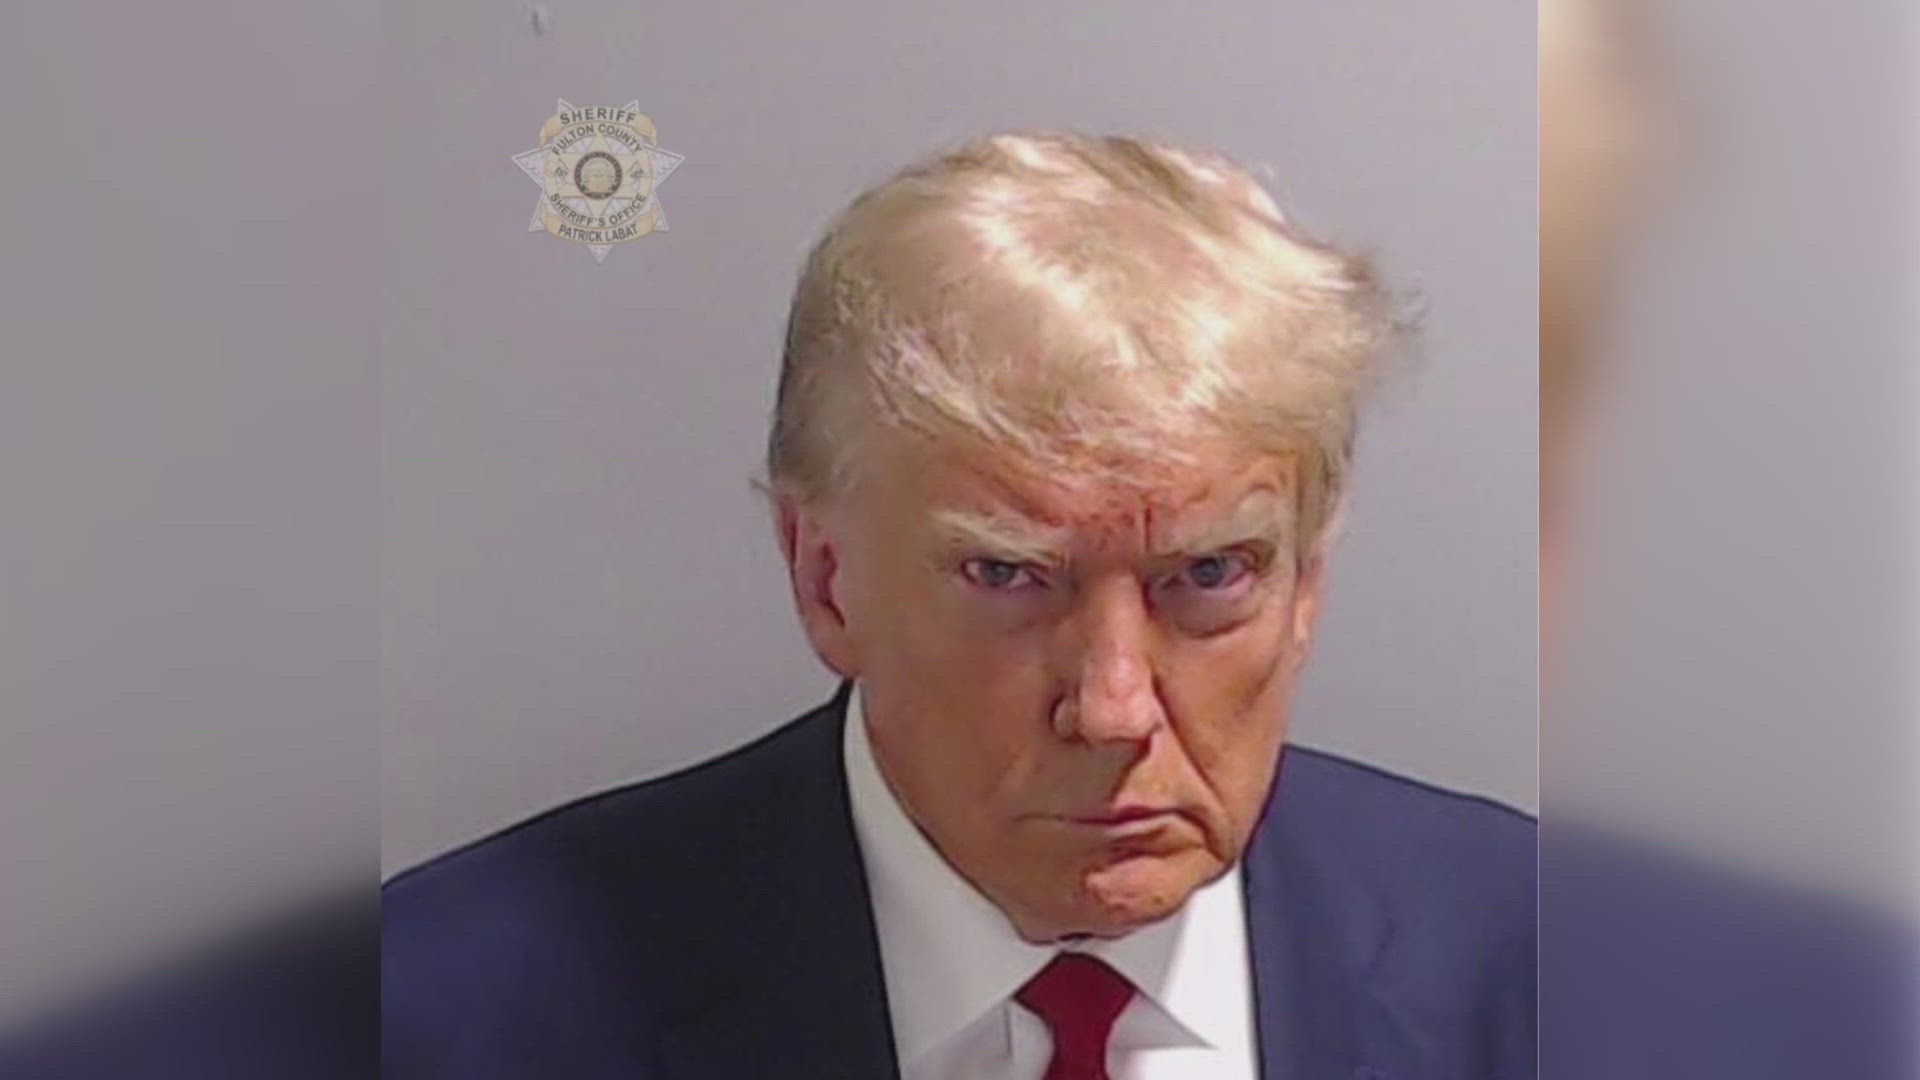 Former President Donald Trump made history on Thursday night as he stood for his mugshot.